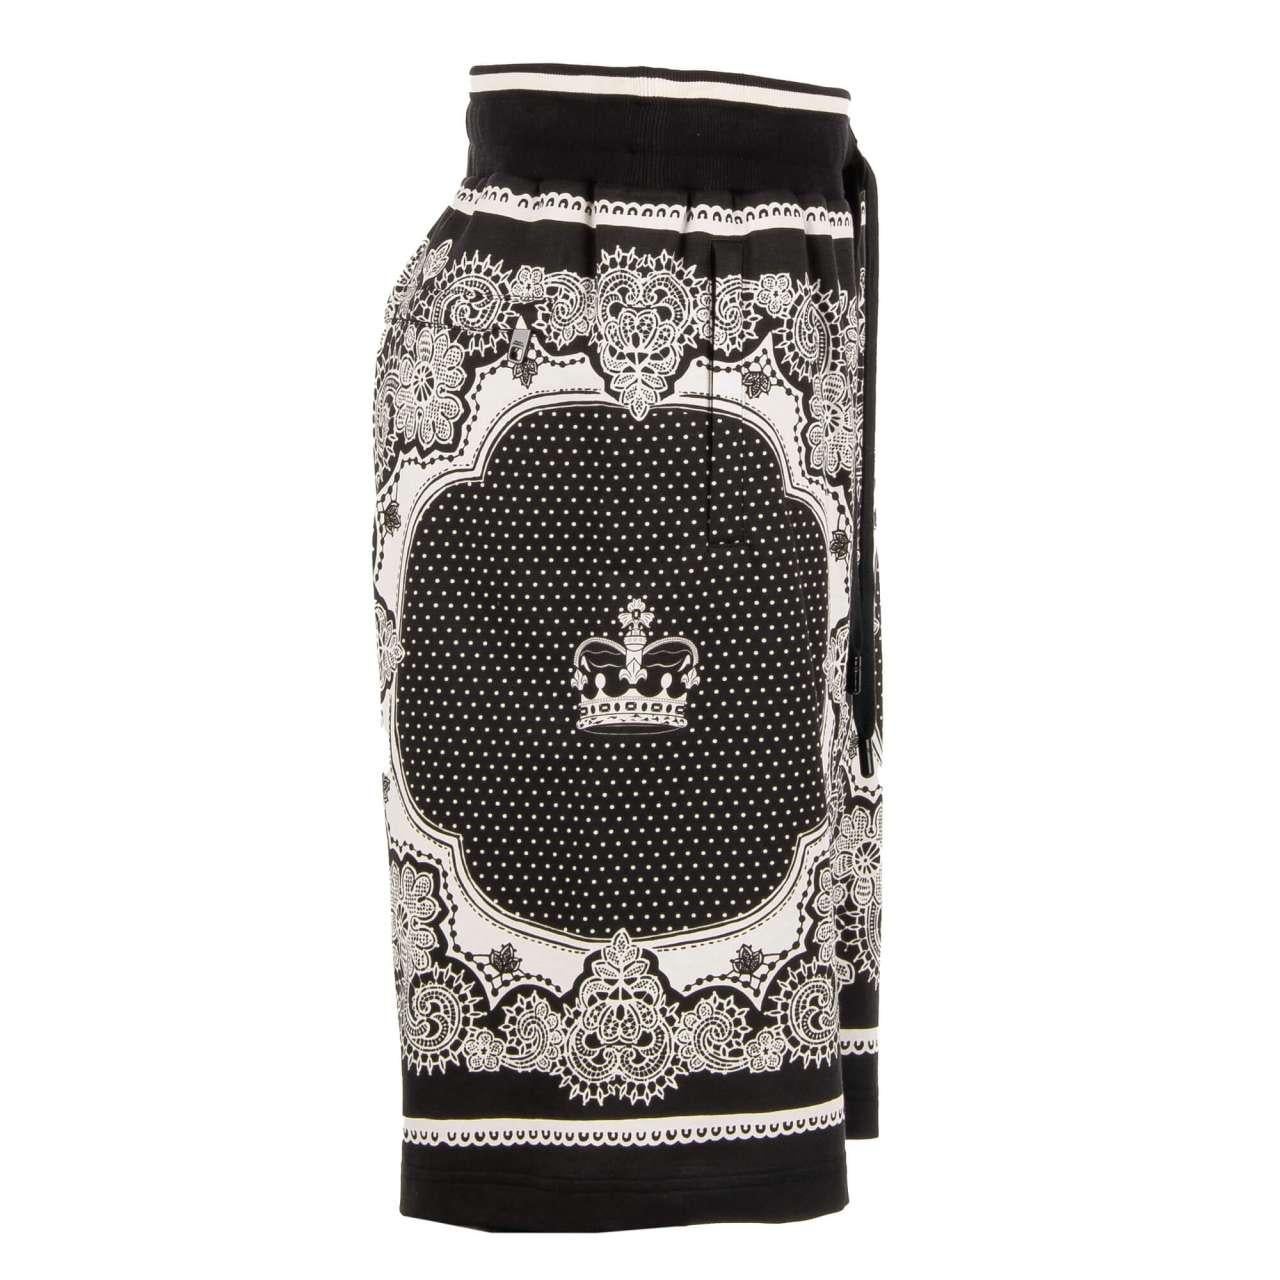 D&G - Cotton Sweatshorts with Bandana Crown Print and Pockets Black White 48 M For Sale 1